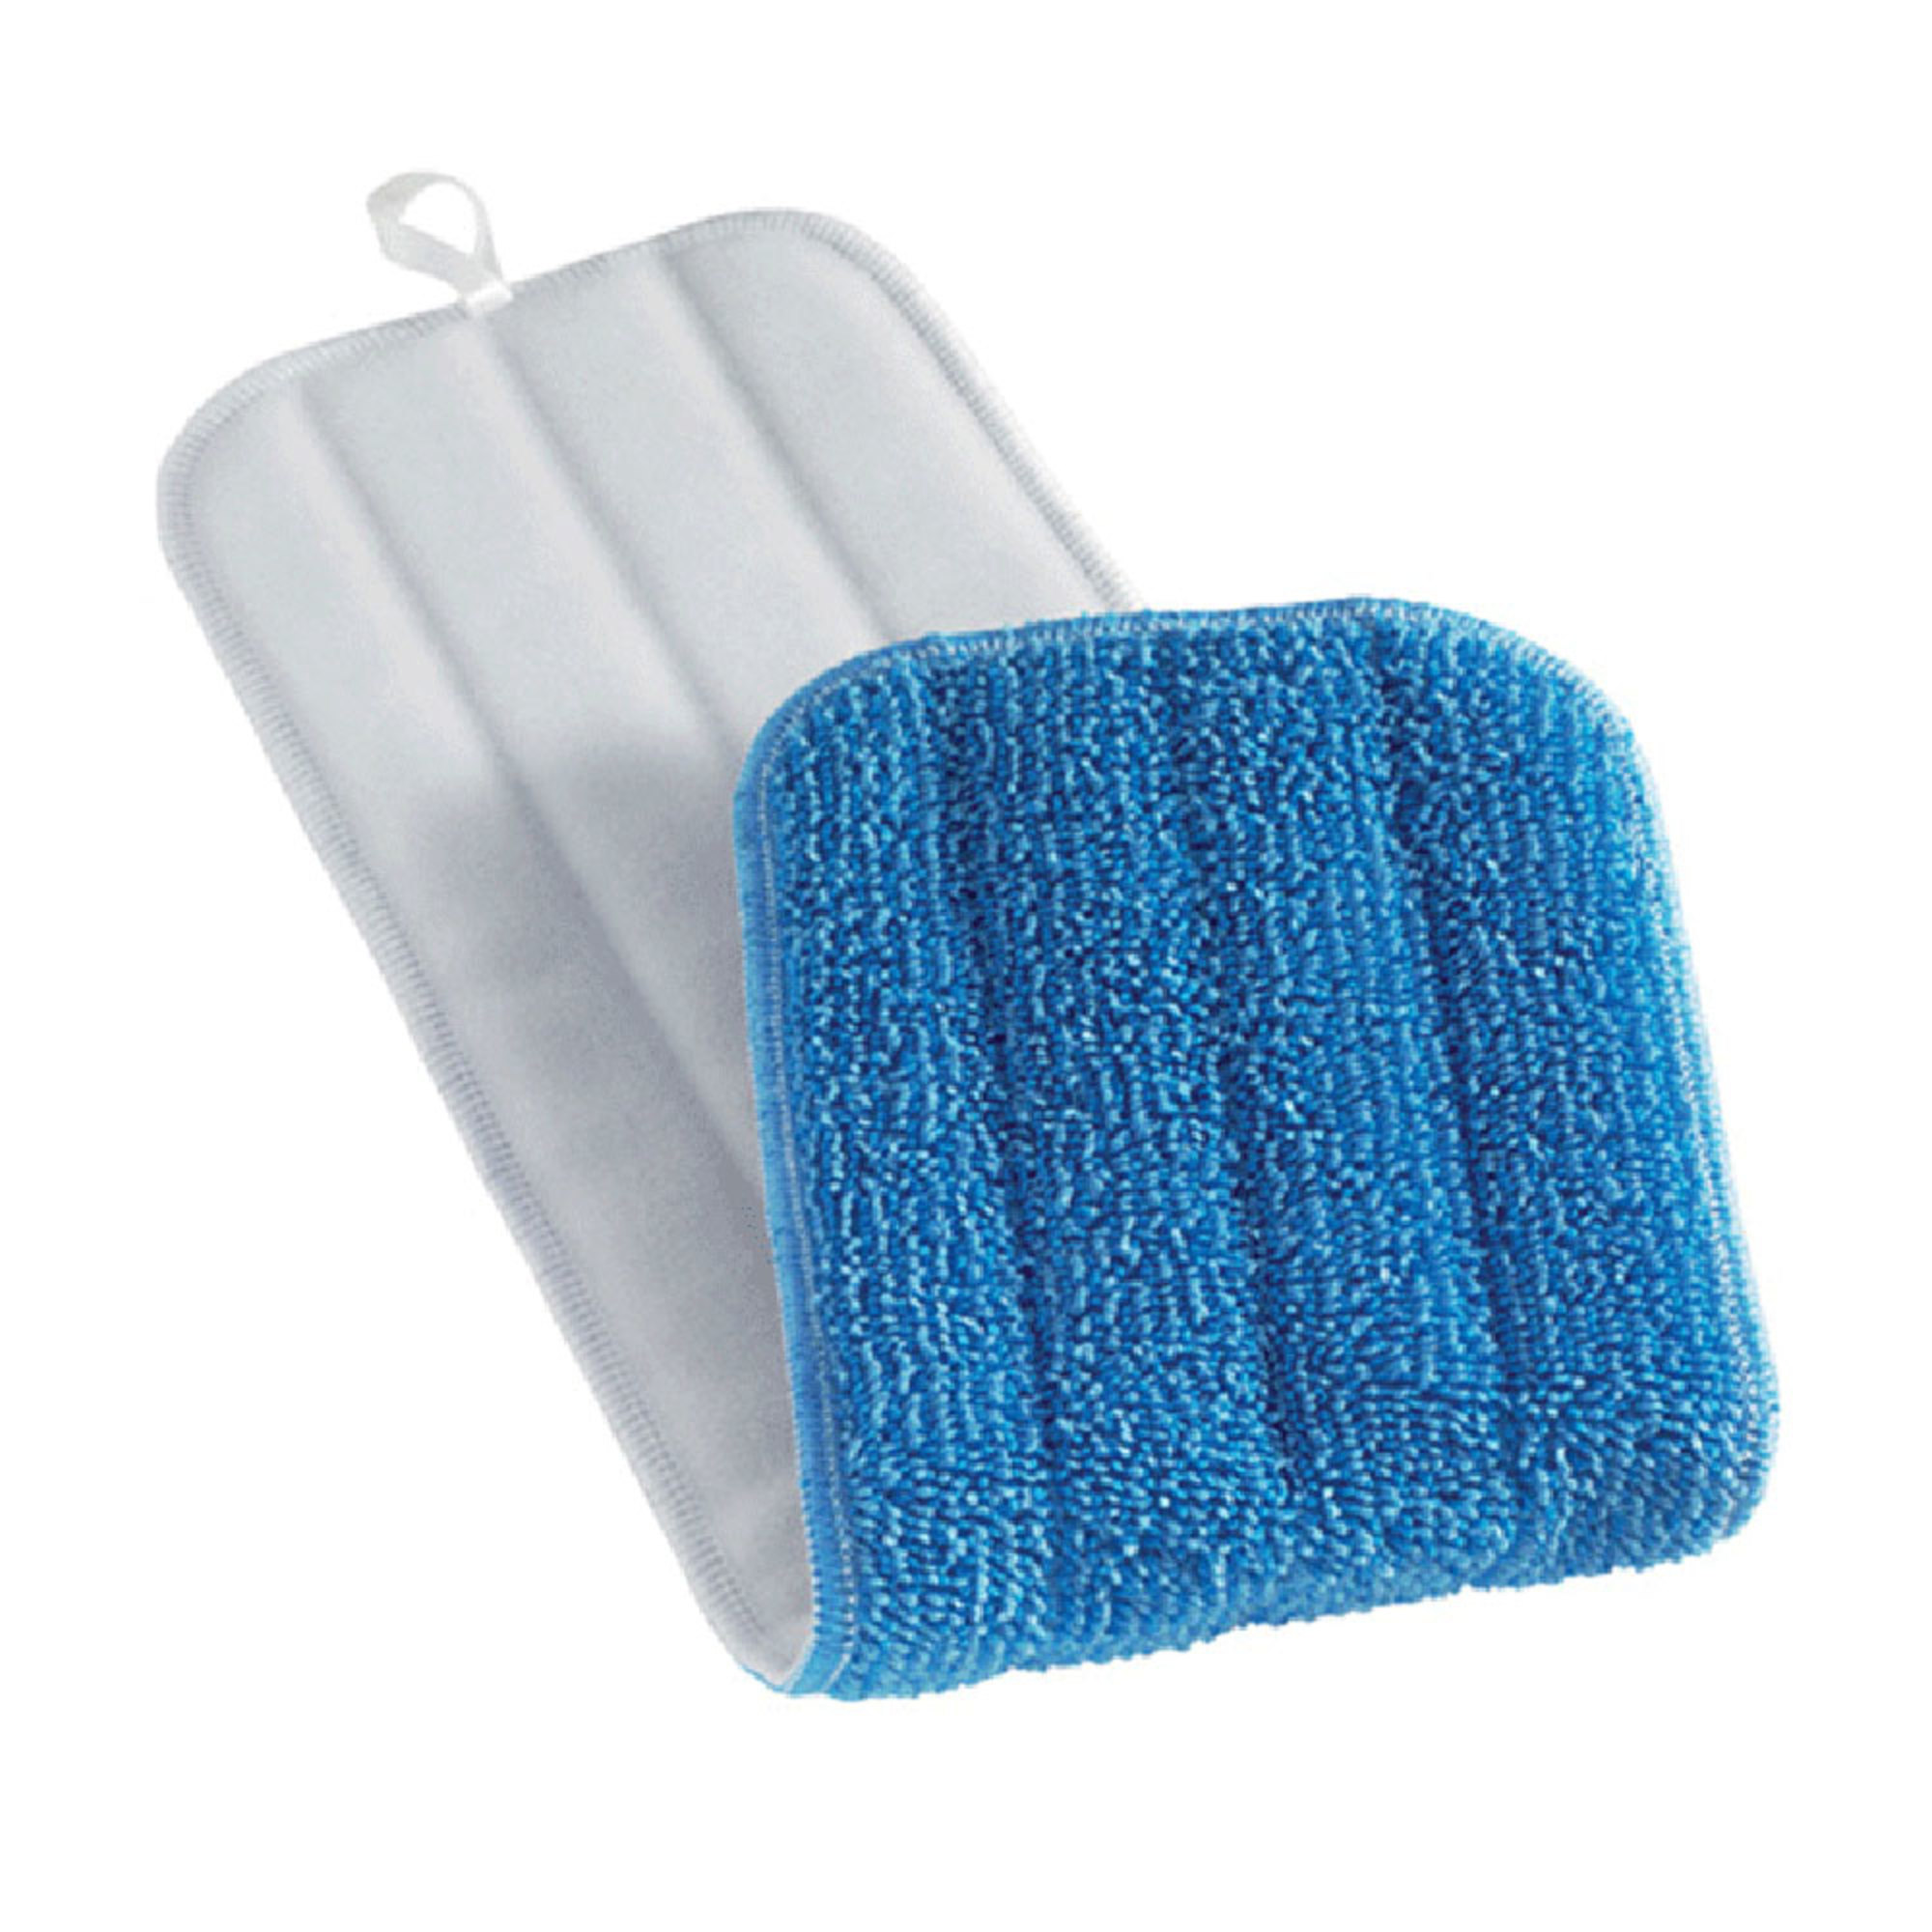 ECLOTH 10621 DEEP CLEAN MOP HEAD USED WITH THE DEEP CLEAN MOP